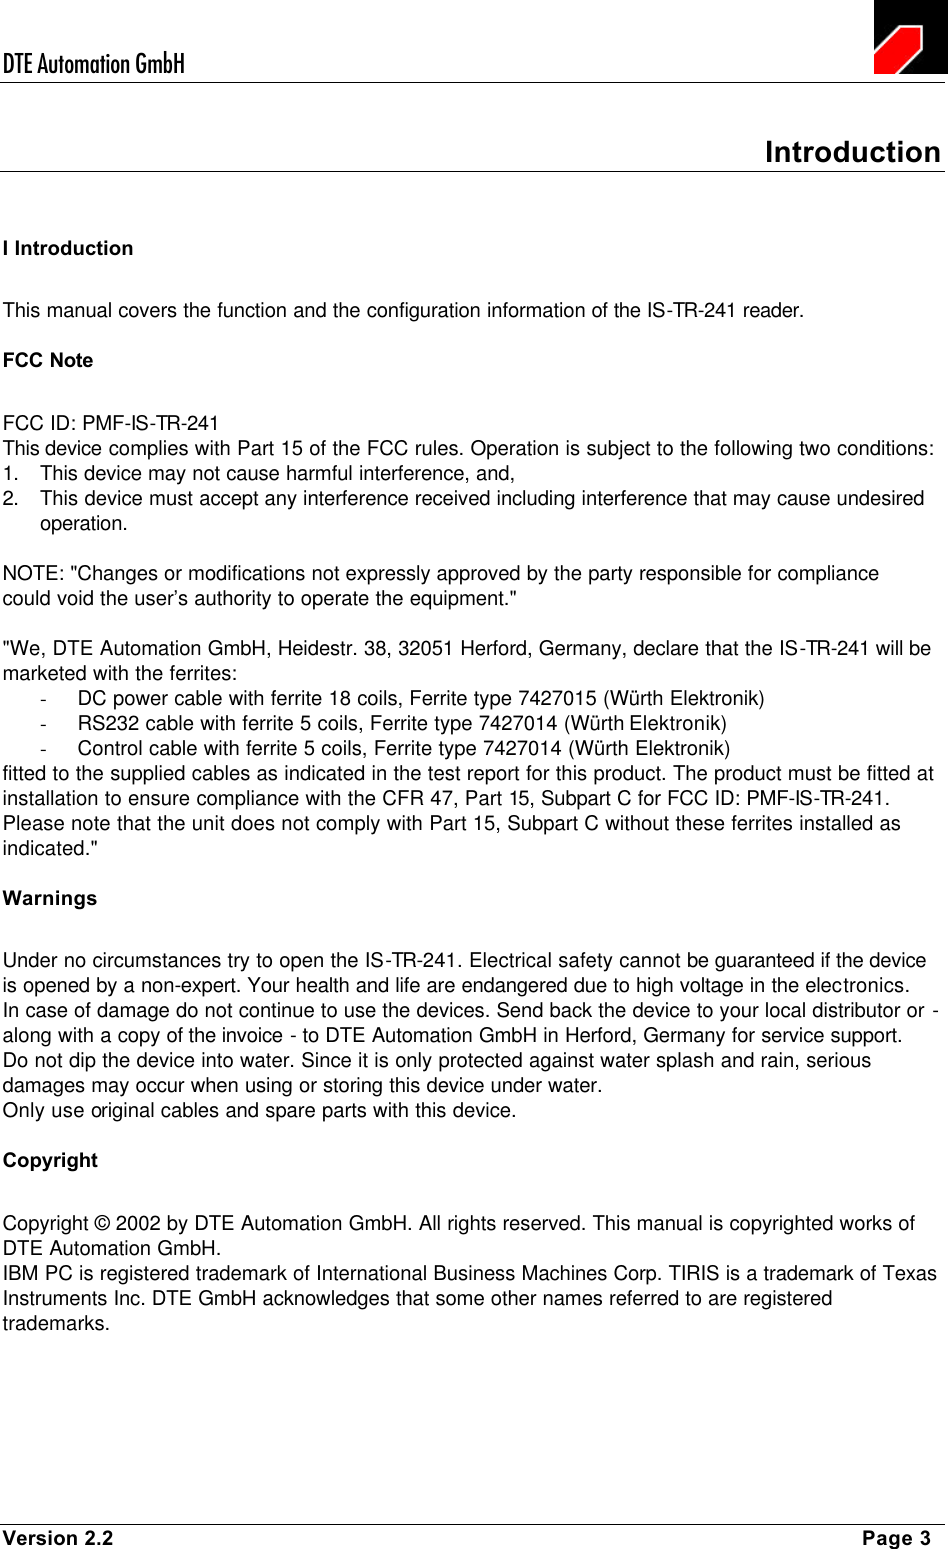 DTE Automation GmbH    Version 2.2    Page 3 Introduction I Introduction This manual covers the function and the configuration information of the IS-TR-241 reader. FCC Note FCC ID: PMF-IS-TR-241 This device complies with Part 15 of the FCC rules. Operation is subject to the following two conditions: 1. This device may not cause harmful interference, and,  2. This device must accept any interference received including interference that may cause undesired operation.  NOTE: &quot;Changes or modifications not expressly approved by the party responsible for compliance  could void the user’s authority to operate the equipment.&quot;  &quot;We, DTE Automation GmbH, Heidestr. 38, 32051 Herford, Germany, declare that the IS-TR-241 will be marketed with the ferrites: - DC power cable with ferrite 18 coils, Ferrite type 7427015 (Würth Elektronik) - RS232 cable with ferrite 5 coils, Ferrite type 7427014 (Würth Elektronik) - Control cable with ferrite 5 coils, Ferrite type 7427014 (Würth Elektronik) fitted to the supplied cables as indicated in the test report for this product. The product must be fitted at installation to ensure compliance with the CFR 47, Part 15, Subpart C for FCC ID: PMF-IS-TR-241. Please note that the unit does not comply with Part 15, Subpart C without these ferrites installed as indicated.&quot; Warnings Under no circumstances try to open the IS-TR-241. Electrical safety cannot be guaranteed if the device is opened by a non-expert. Your health and life are endangered due to high voltage in the electronics. In case of damage do not continue to use the devices. Send back the device to your local distributor or - along with a copy of the invoice - to DTE Automation GmbH in Herford, Germany for service support. Do not dip the device into water. Since it is only protected against water splash and rain, serious damages may occur when using or storing this device under water. Only use original cables and spare parts with this device.  Copyright Copyright © 2002 by DTE Automation GmbH. All rights reserved. This manual is copyrighted works of DTE Automation GmbH.  IBM PC is registered trademark of International Business Machines Corp. TIRIS is a trademark of Texas Instruments Inc. DTE GmbH acknowledges that some other names referred to are registered trademarks.  